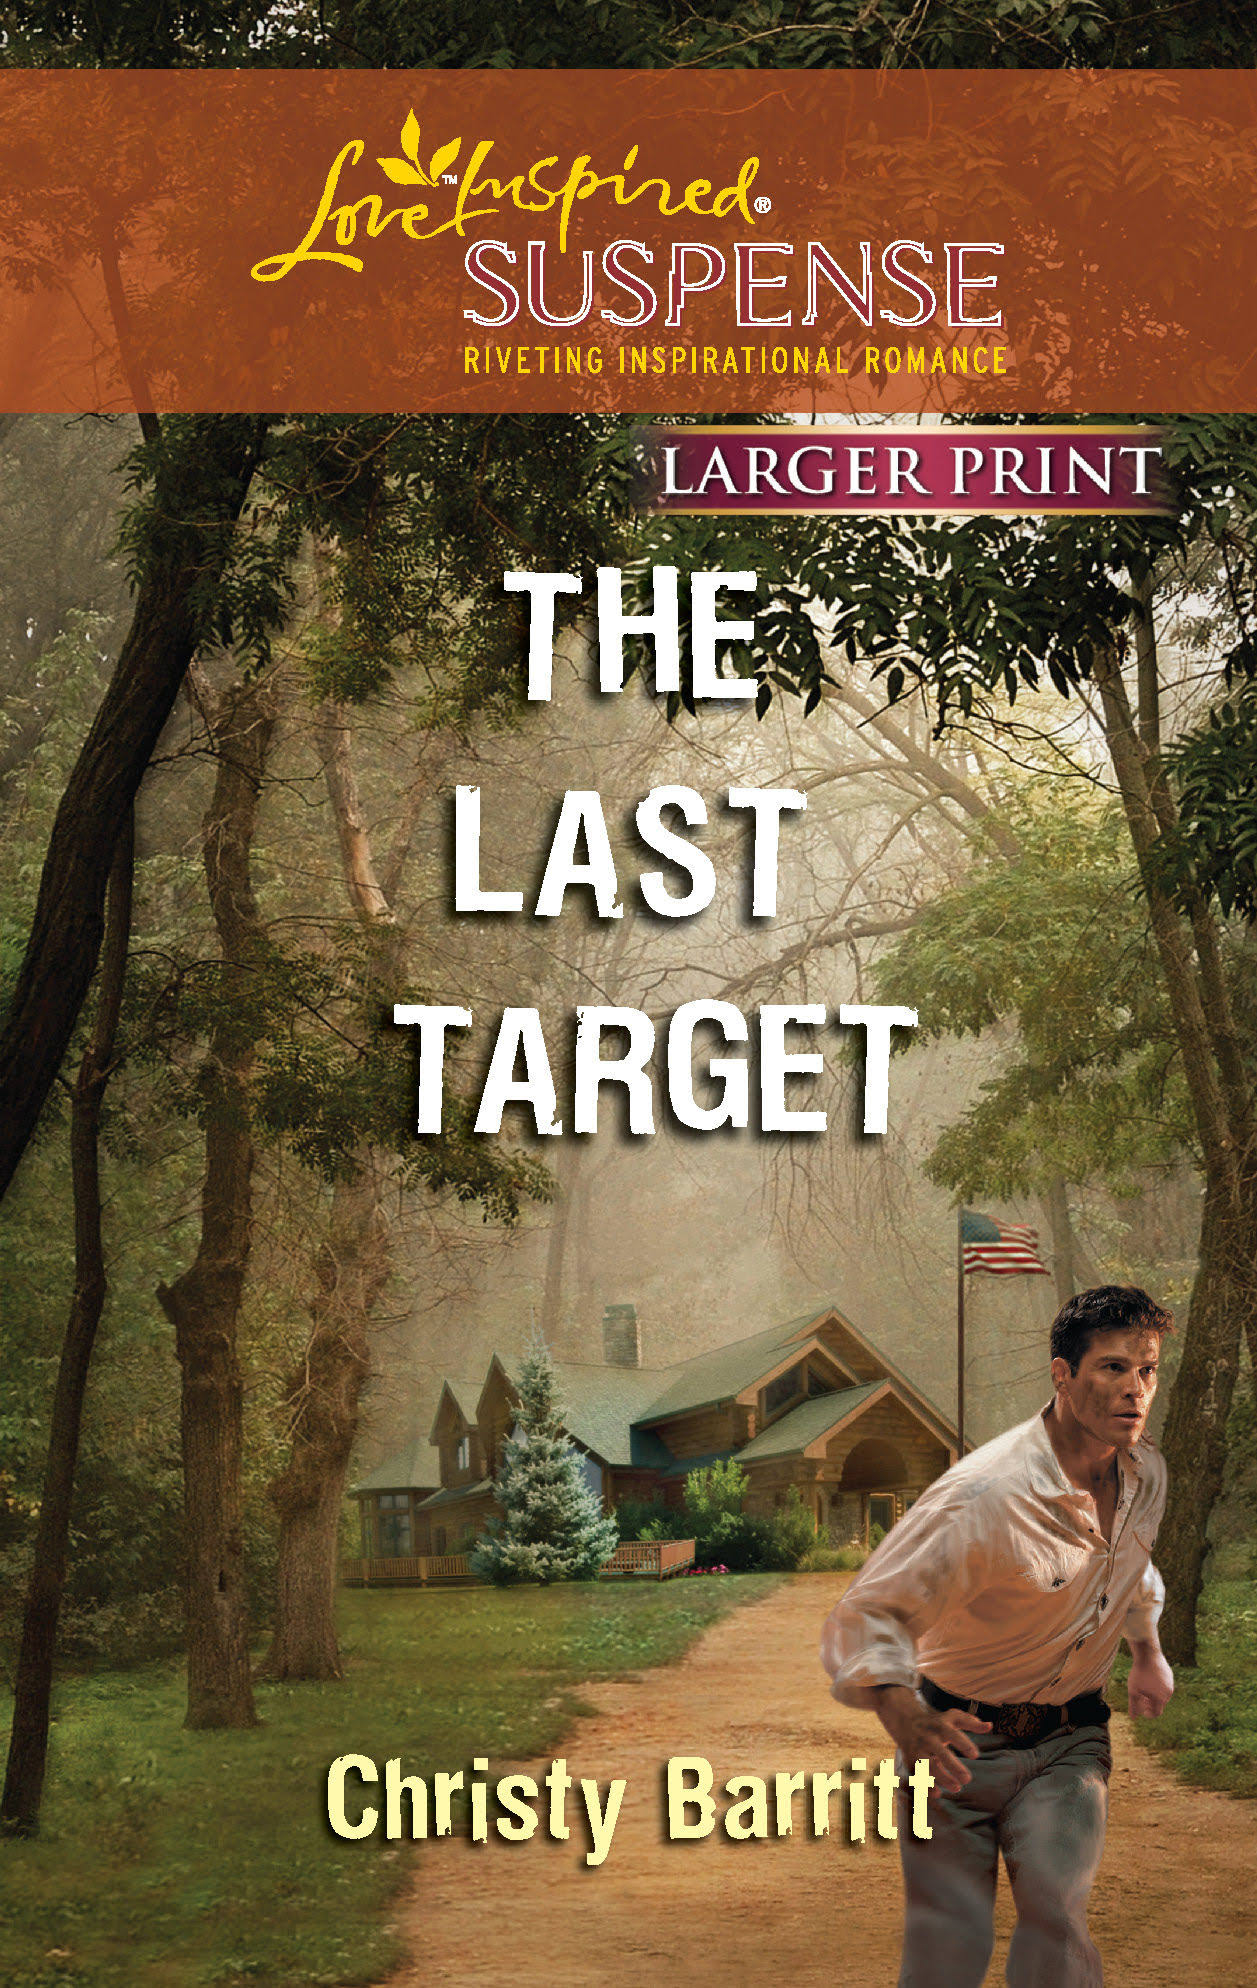 The Last Target [Book]